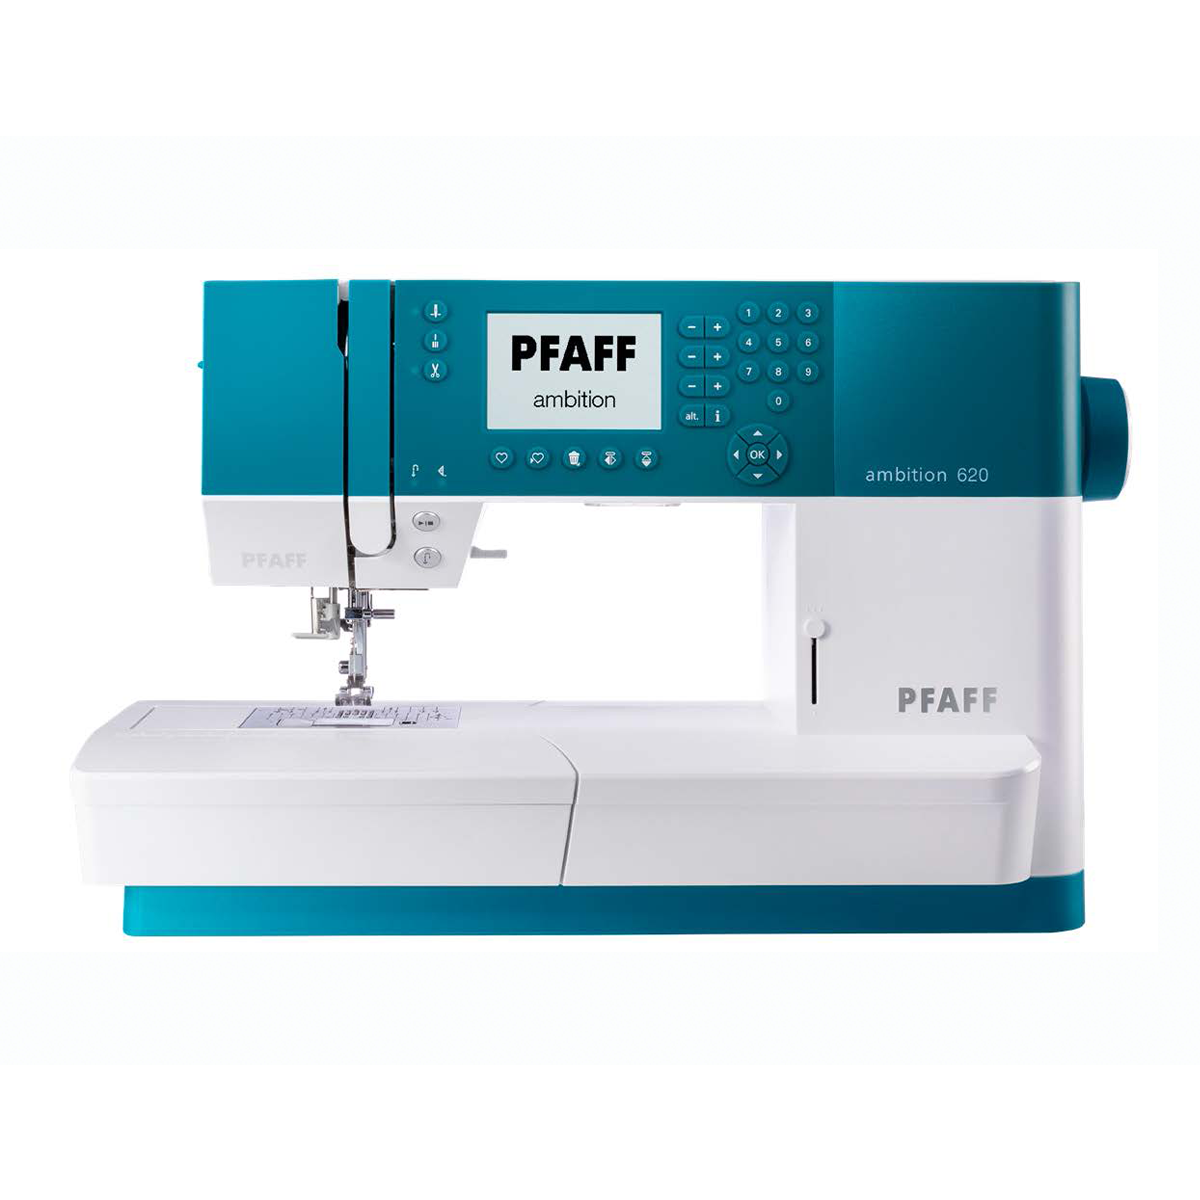 Pfaff Ambition 620 sewing and quilting machine main product image